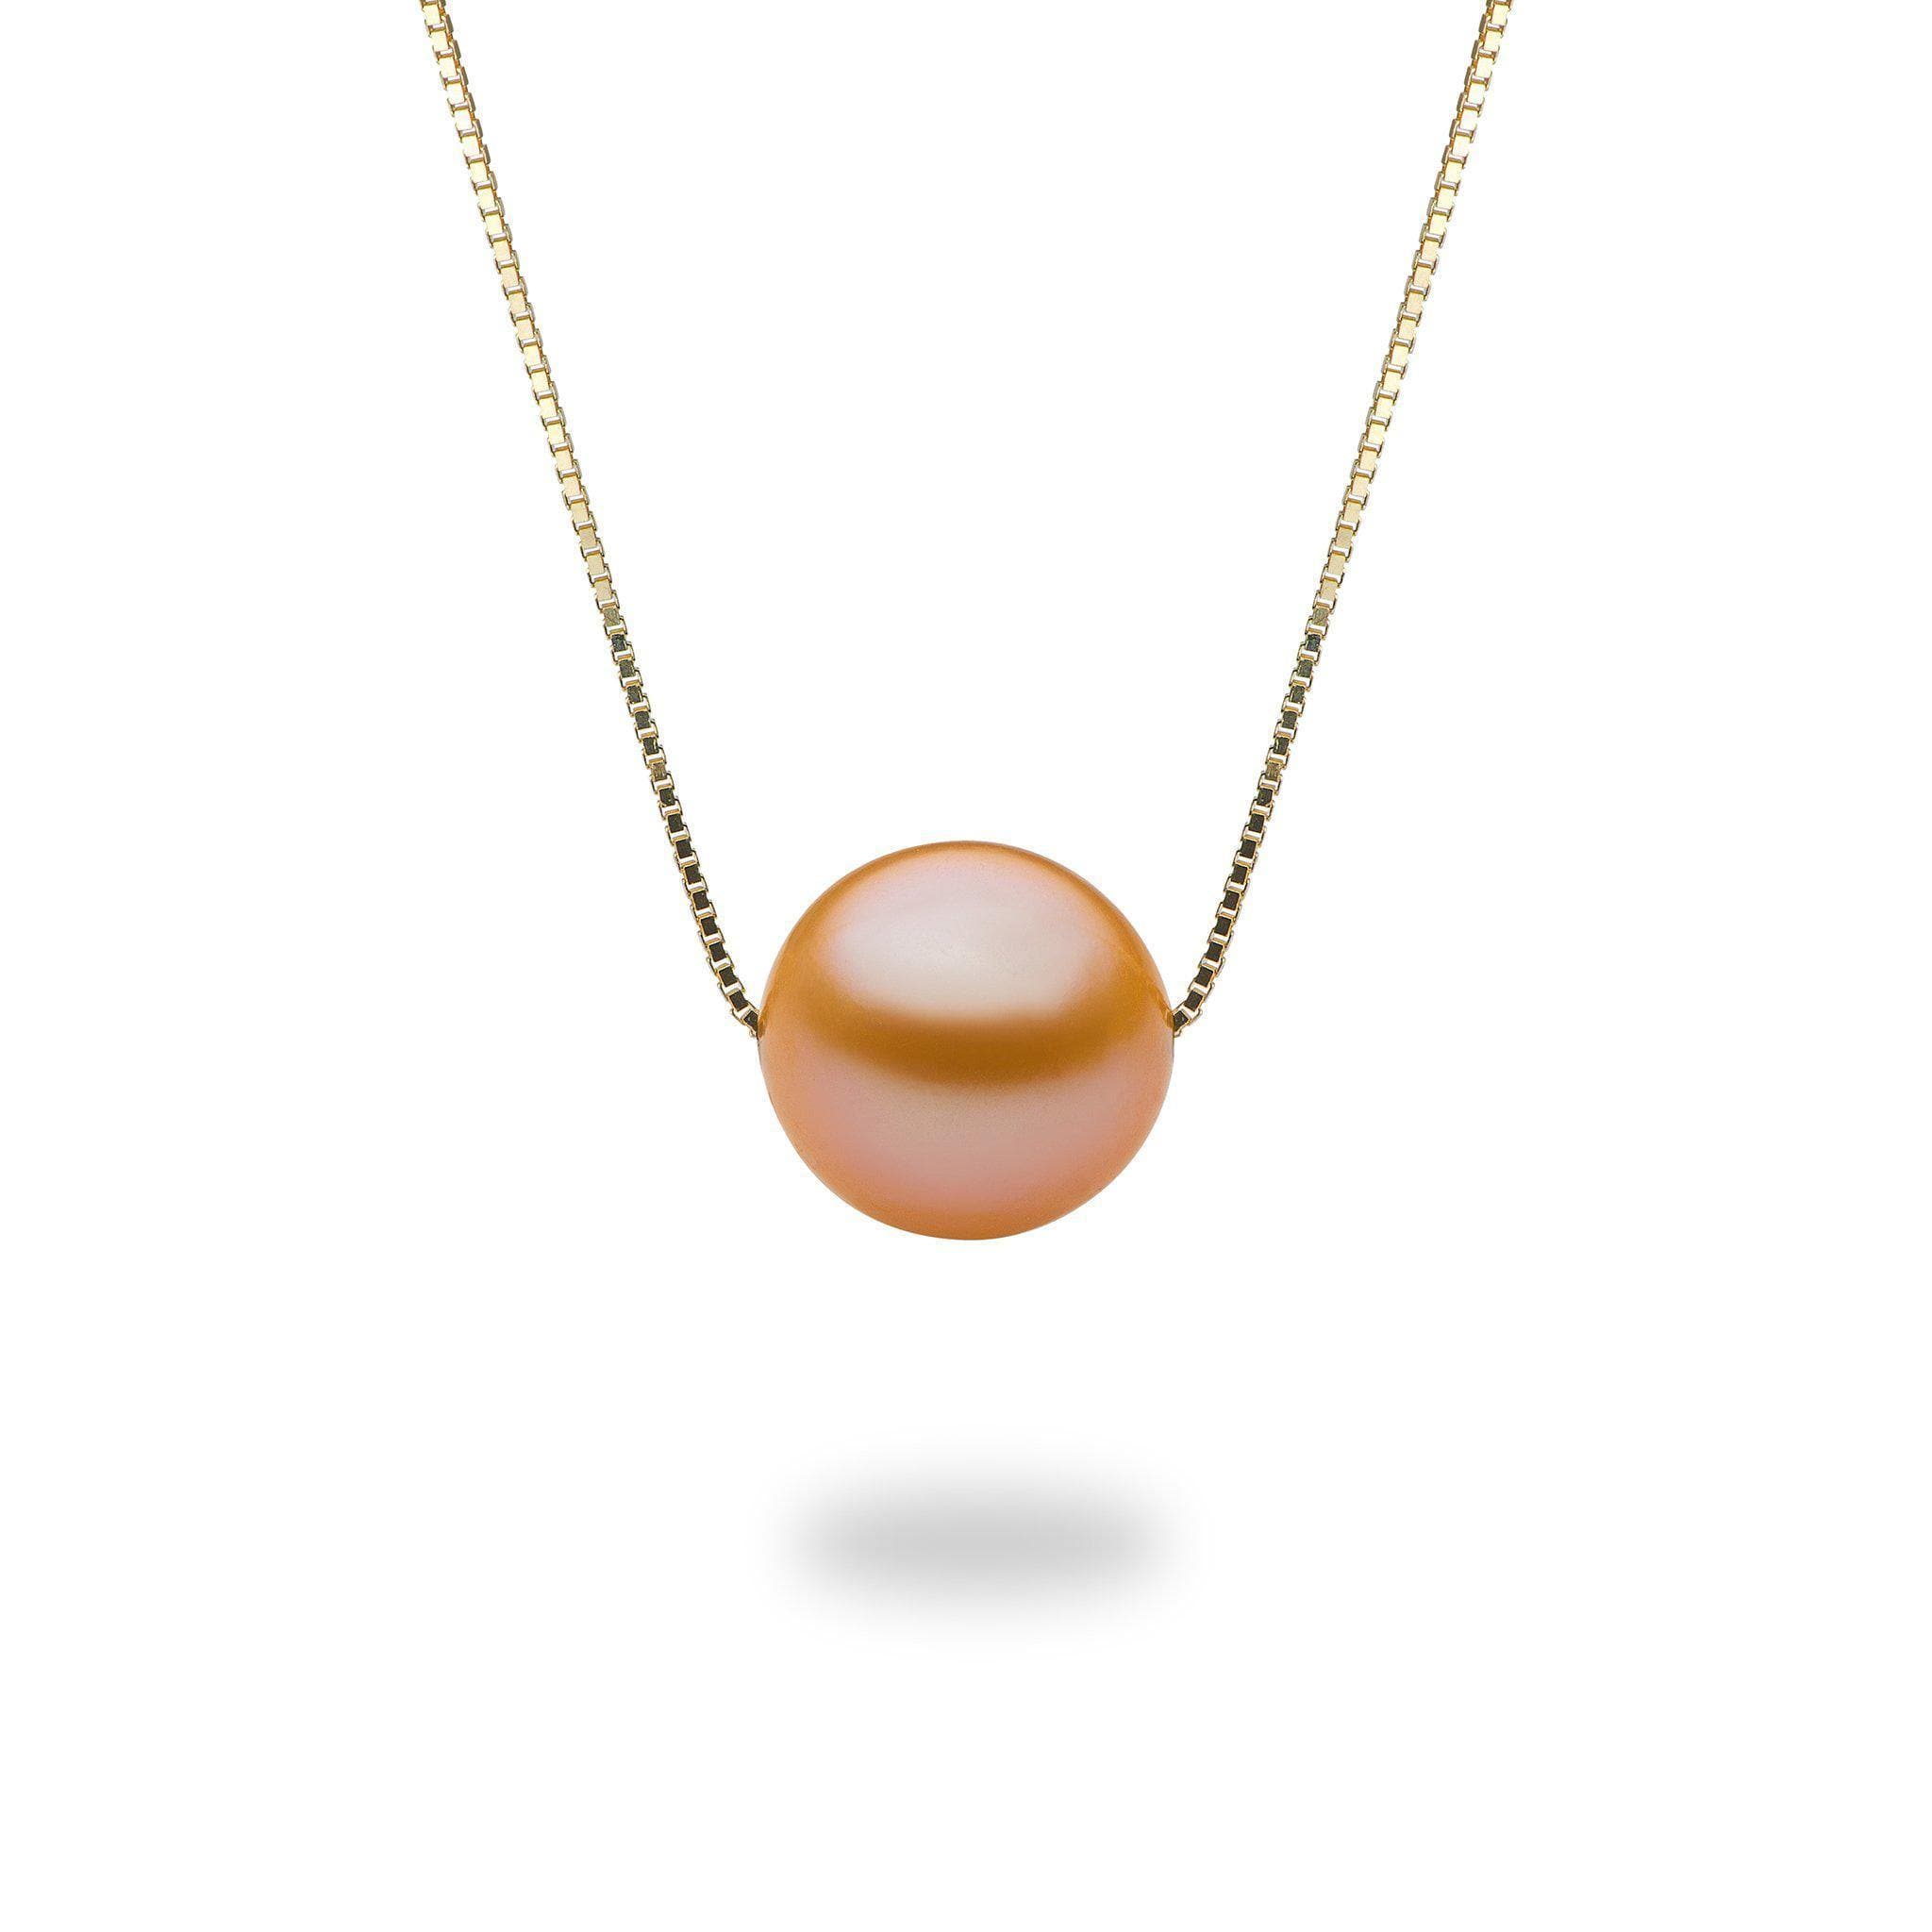 16-18" Adjustable Peach Freshwater Floating Pearl Necklace in Gold - Maui Divers Jewelry